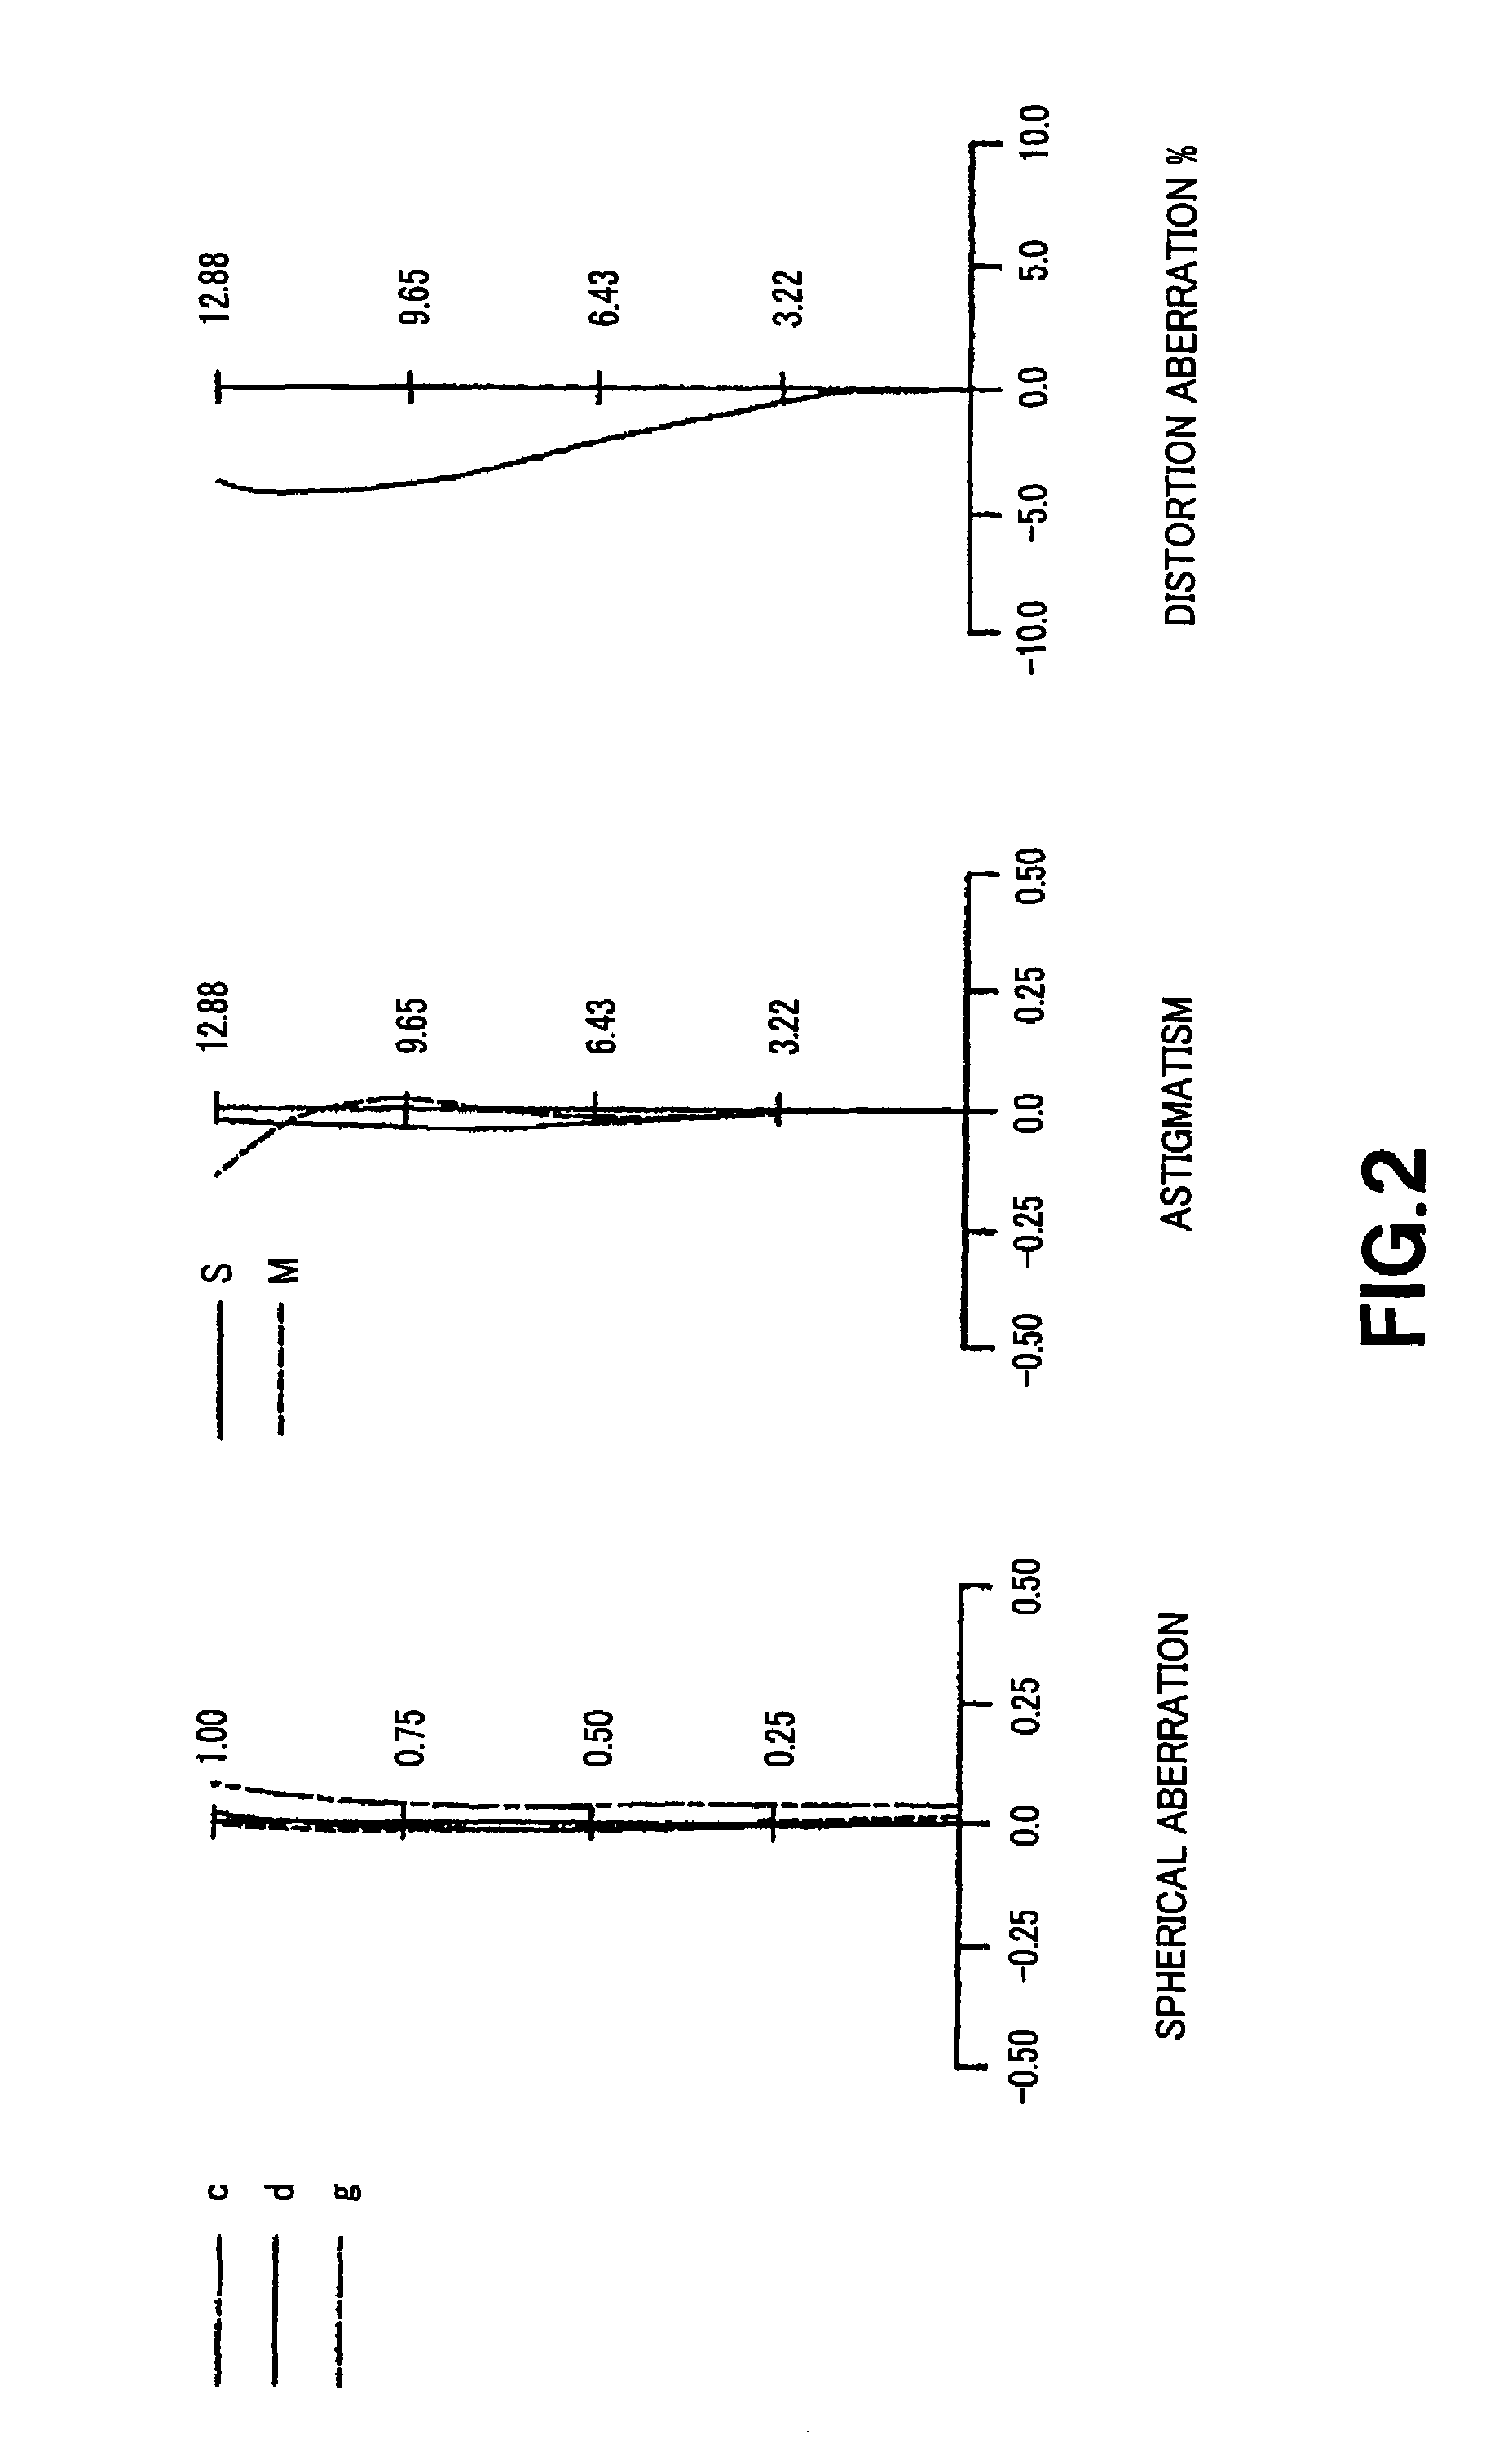 Zoom lens and image pick-up apparatus